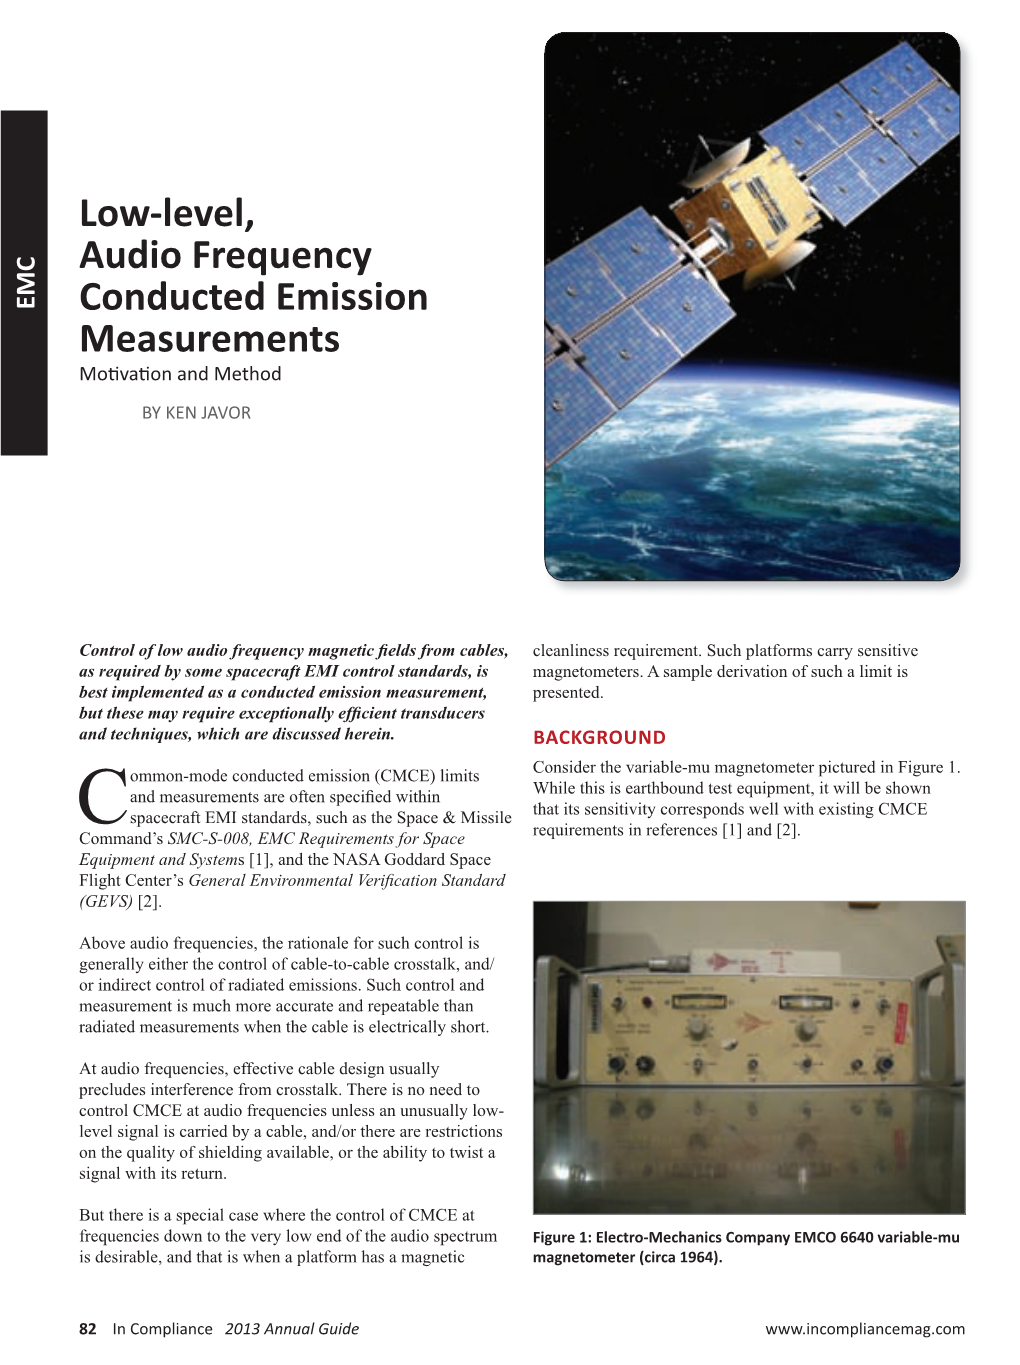 Low-Level, Audio Frequency Conducted Emission Measurements